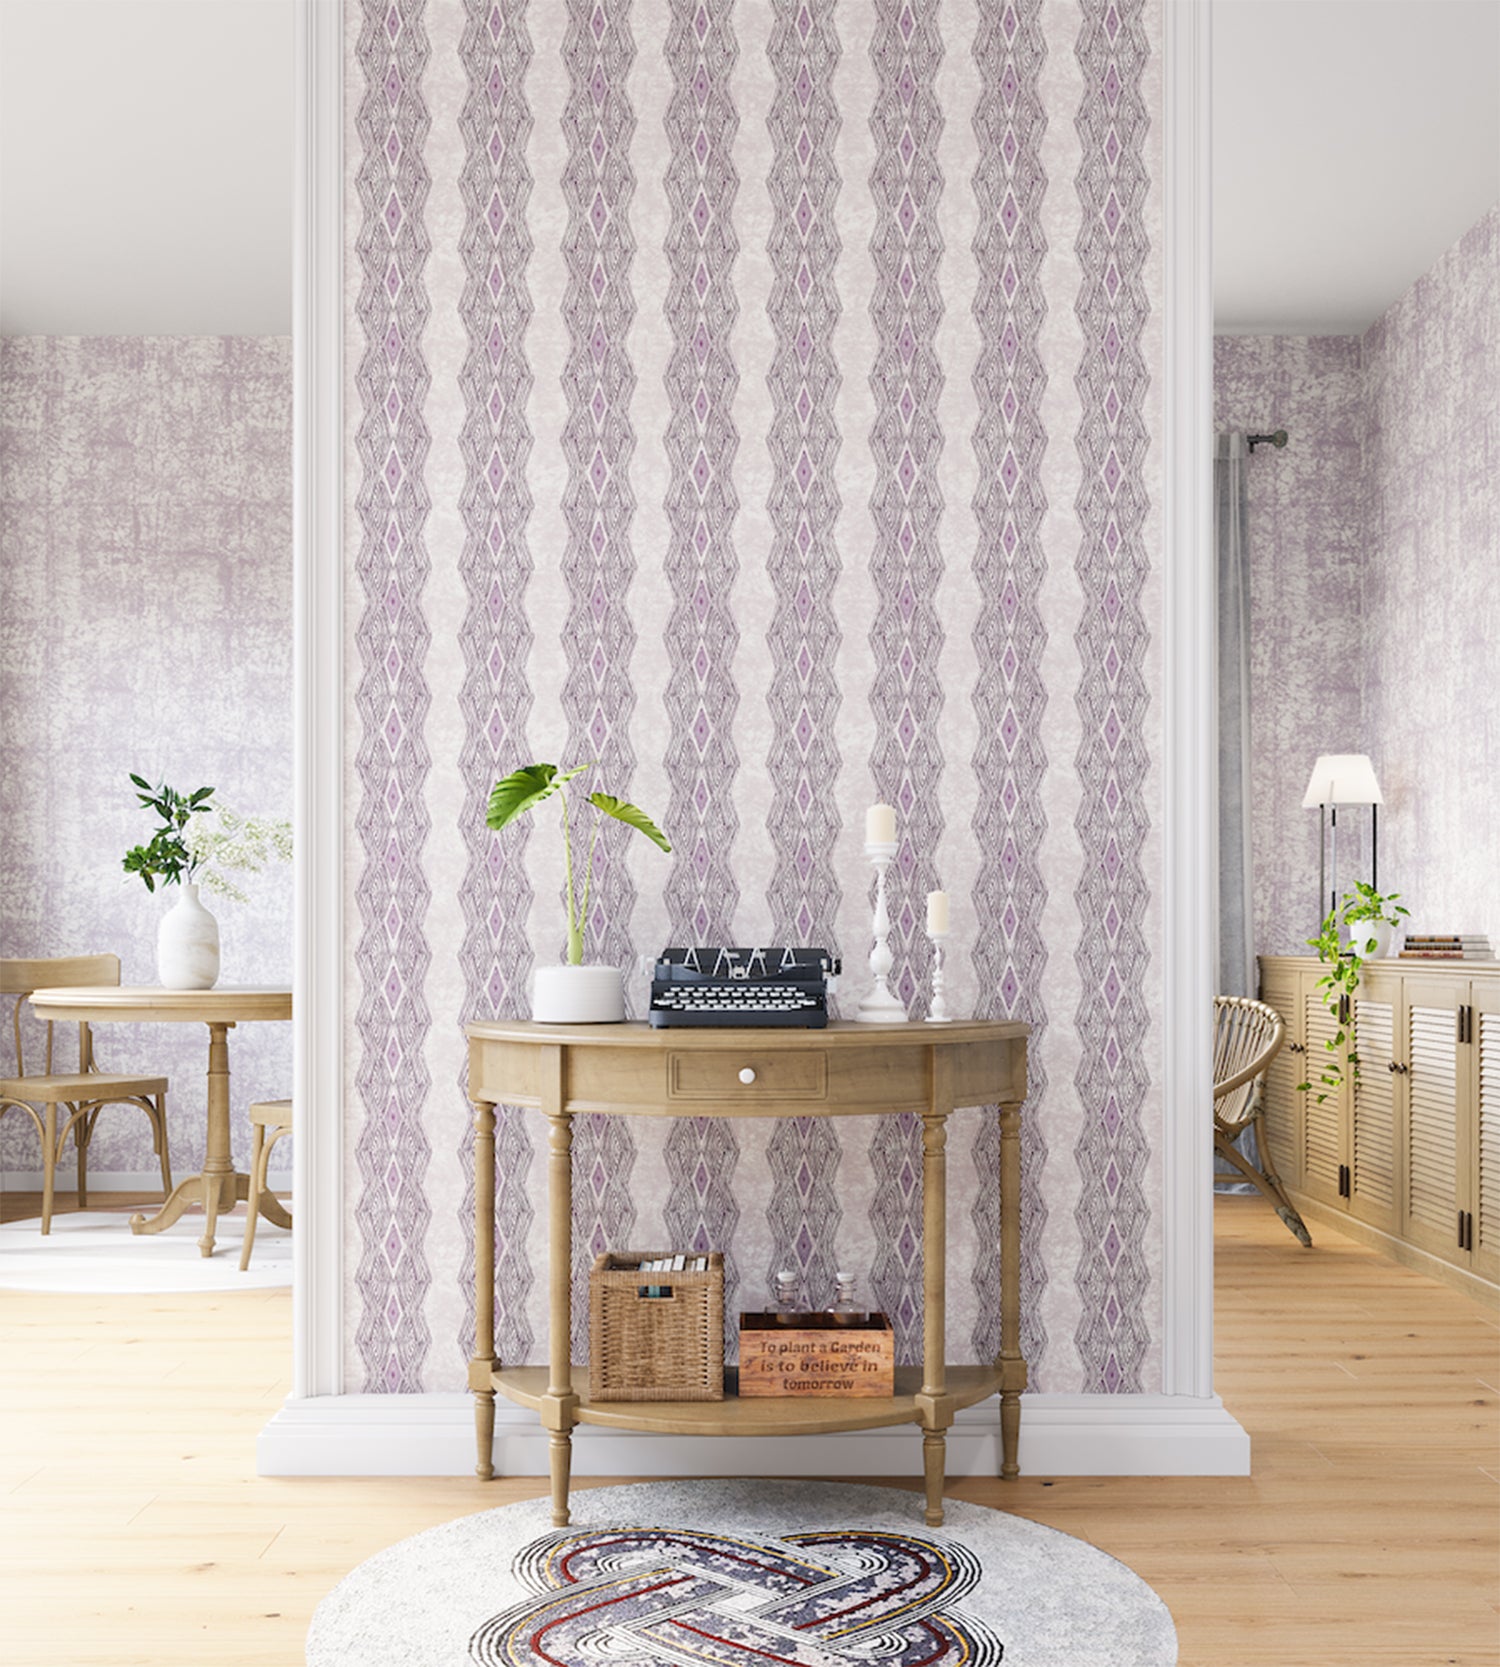 A maximalist living space with an accent wall papered in an intricate diamond stripe print in purple and cream.